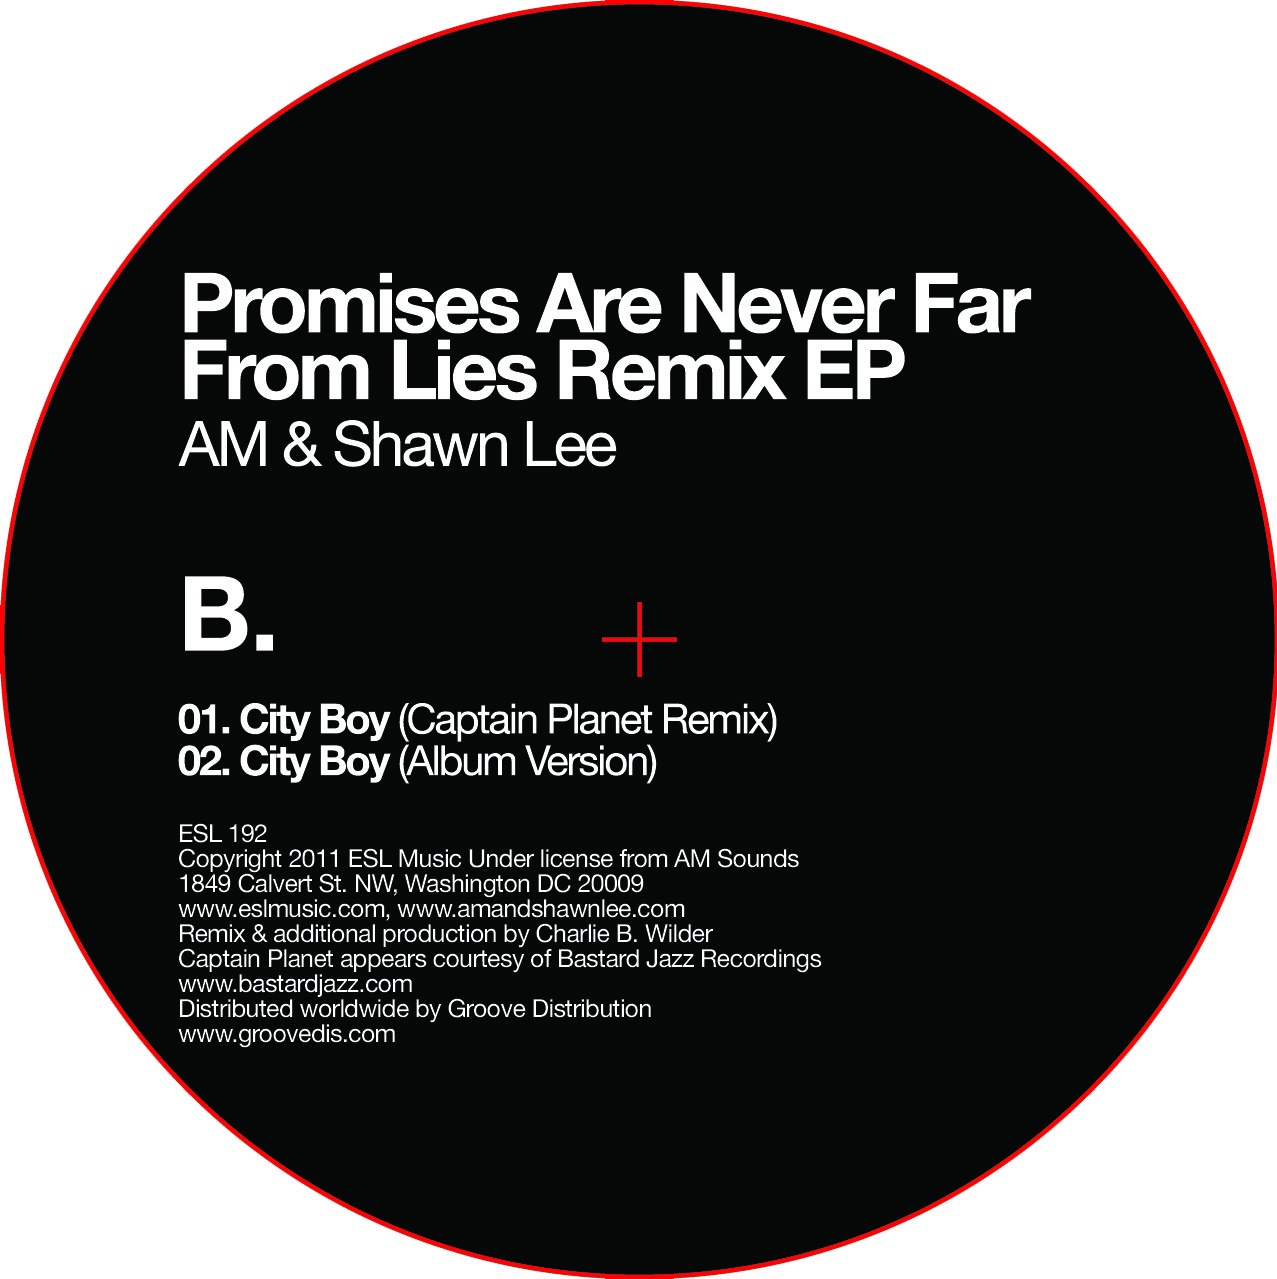 AM & Shawn Lee/PROMISES ARE NEVER... 12"